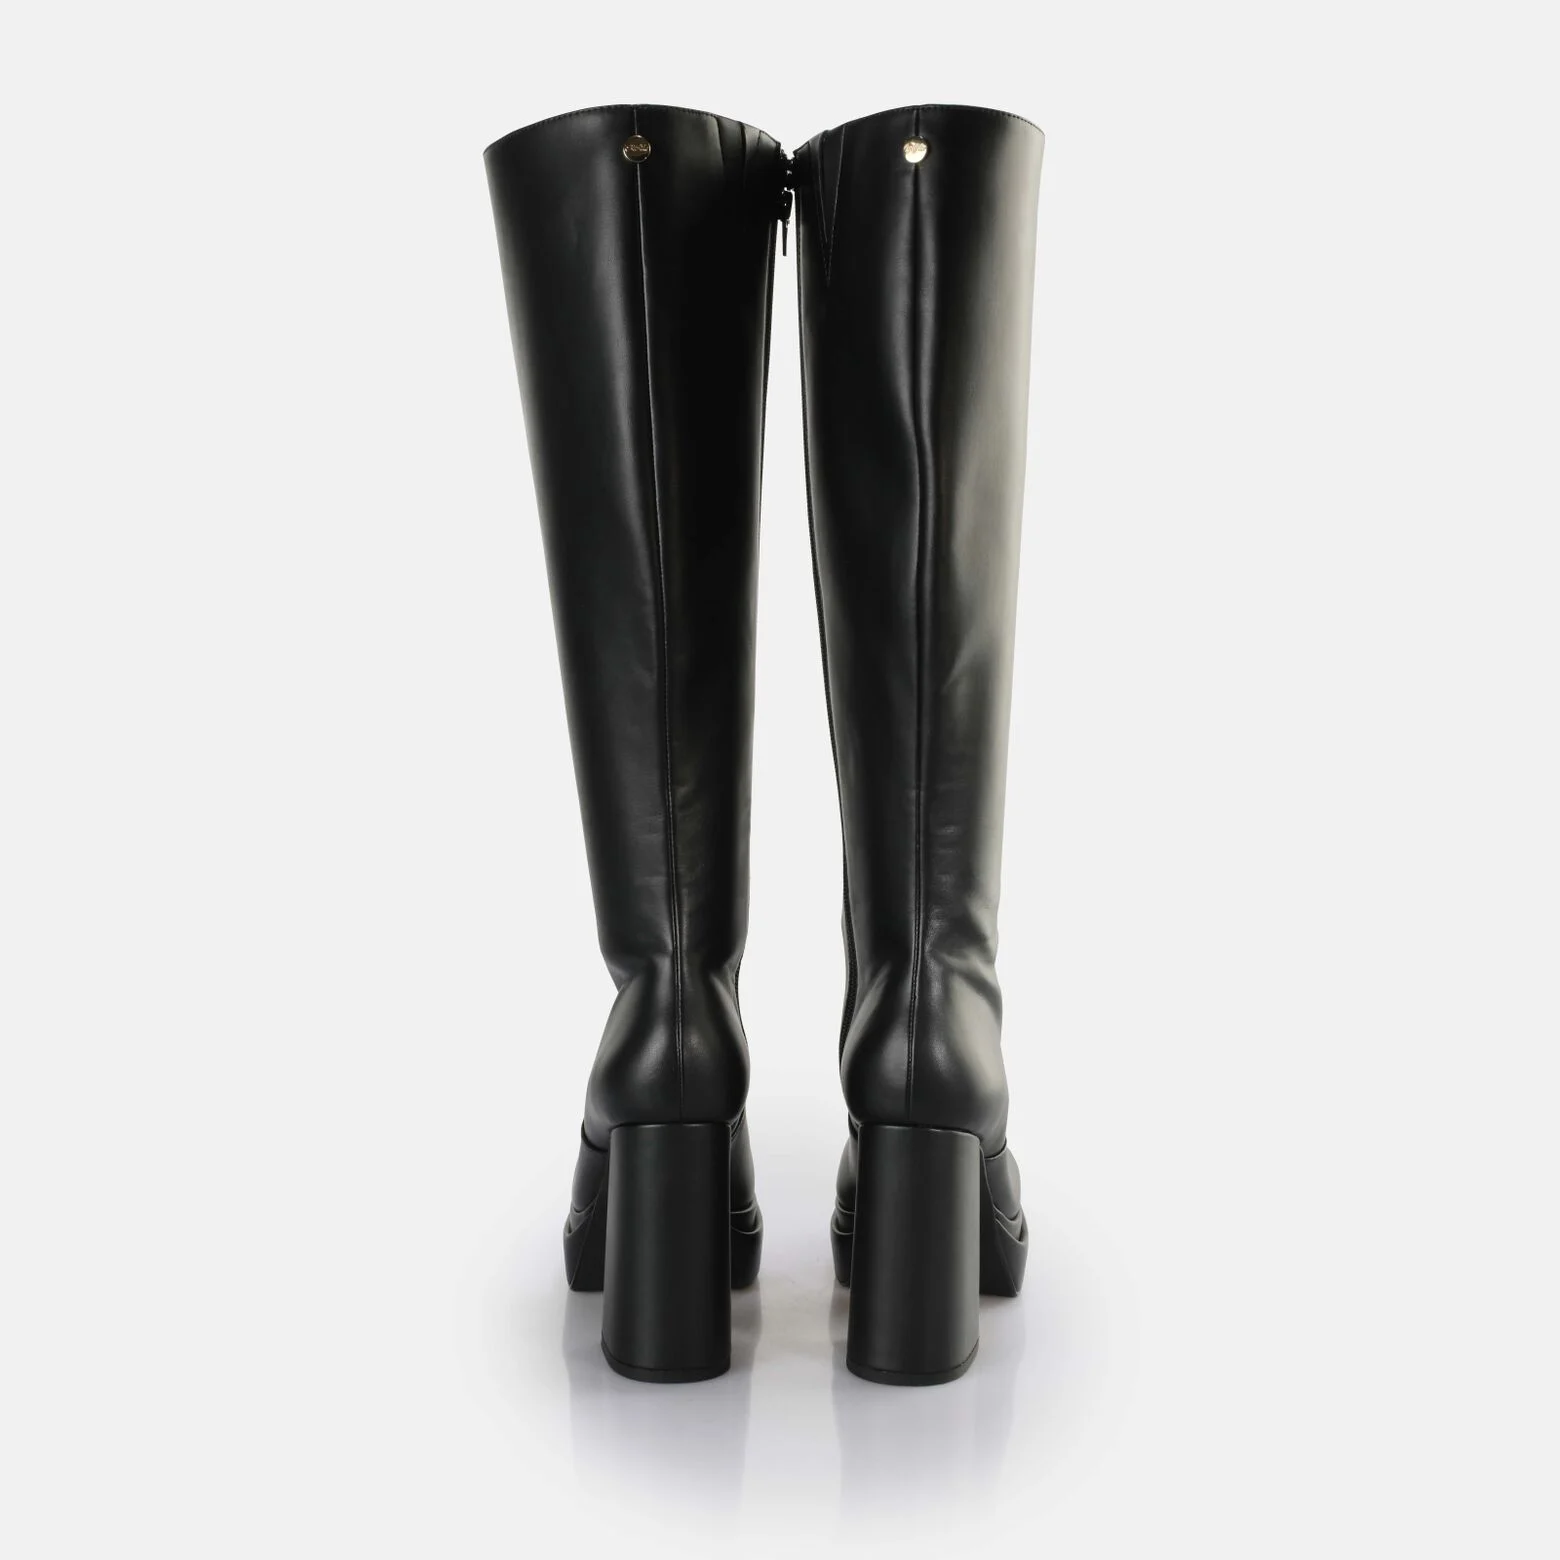 Buffalo Platform Shoes 90s boots ankle boots (similar to the former: T 24400 II) vegan black